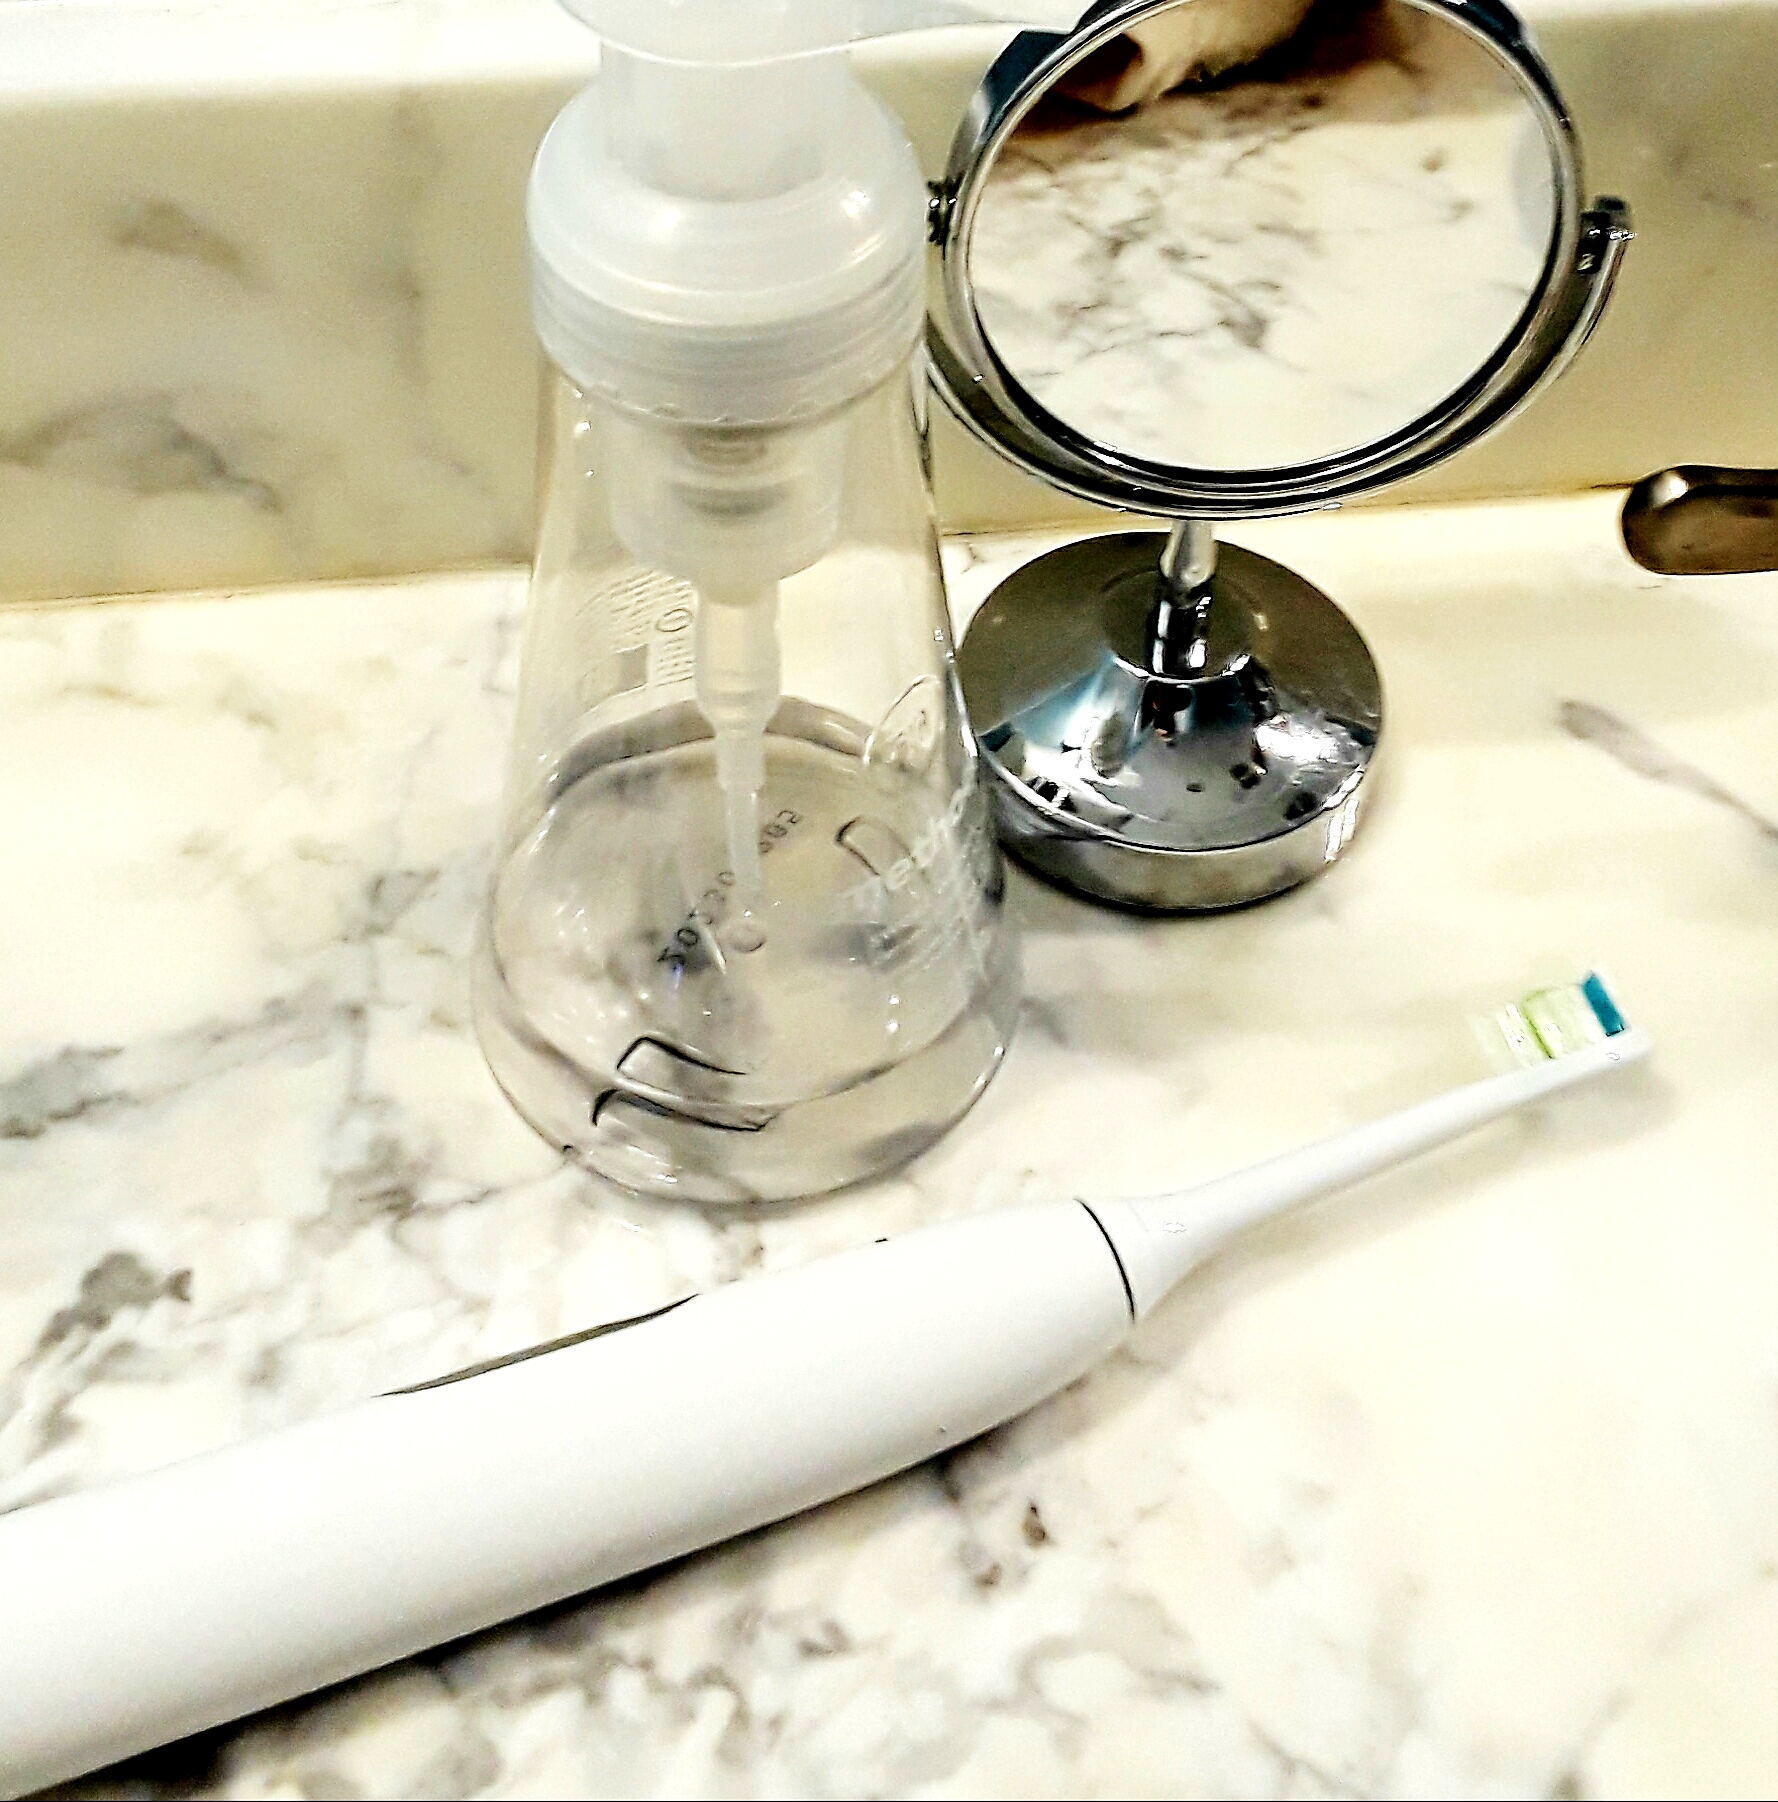 Soniccare toothbrush is all white and unobtrusive on the bathroom counter